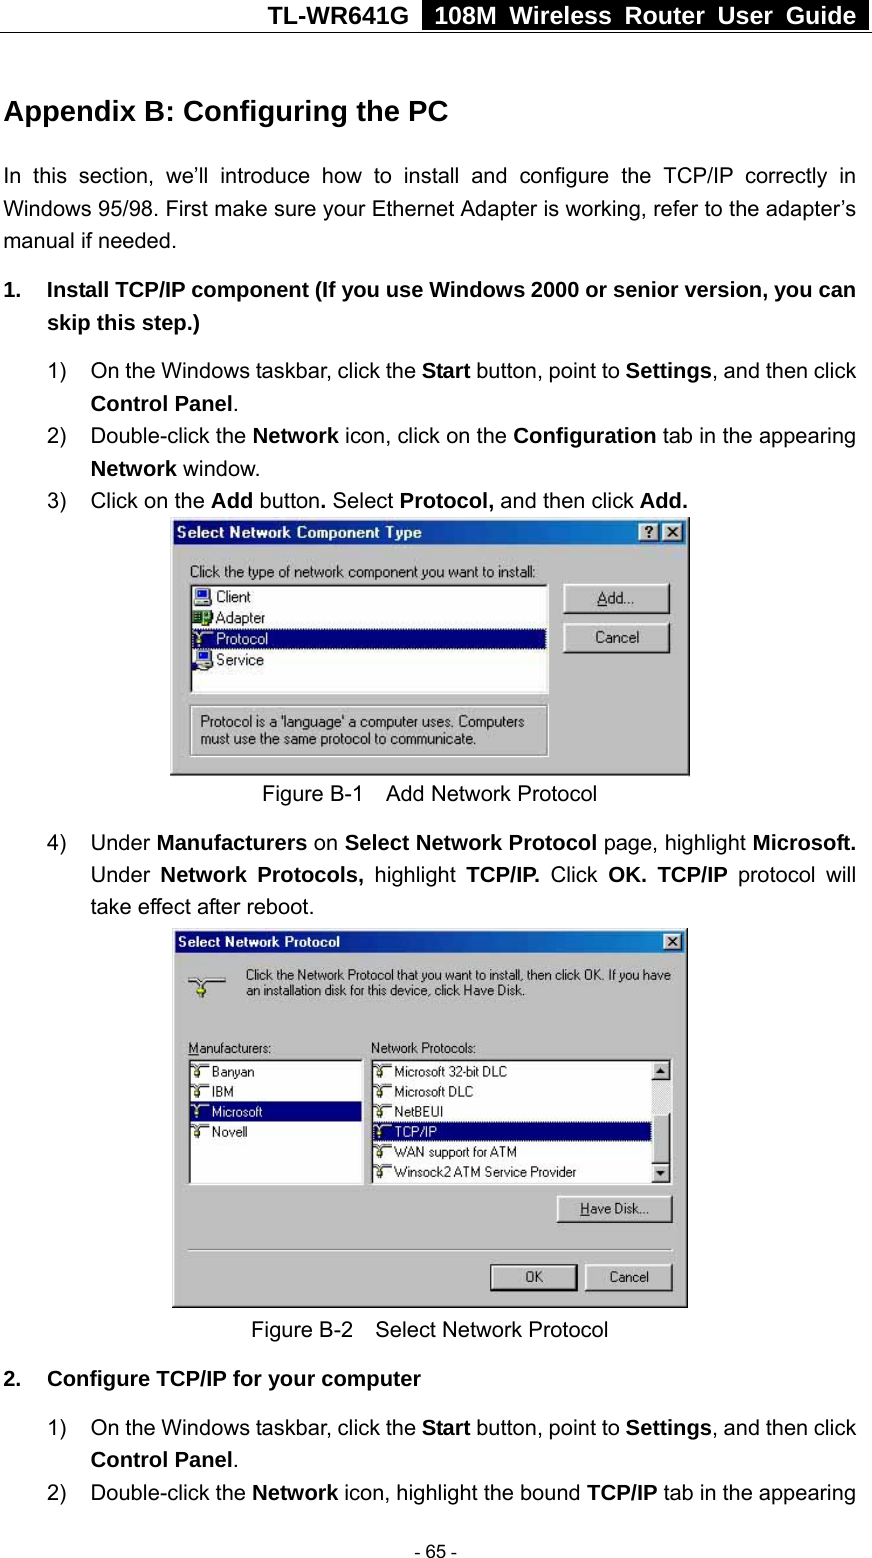 TL-WR641G   108M Wireless Router User Guide  Appendix B: Configuring the PC In this section, we’ll introduce how to install and configure the TCP/IP correctly in Windows 95/98. First make sure your Ethernet Adapter is working, refer to the adapter’s manual if needed.   1.  Install TCP/IP component (If you use Windows 2000 or senior version, you can skip this step.) 1)  On the Windows taskbar, click the Start button, point to Settings, and then click Control Panel. 2) Double-click the Network icon, click on the Configuration tab in the appearing Network window.  3)  Click on the Add button. Select Protocol, and then click Add.  Figure B-1    Add Network Protocol 4) Under Manufacturers on Select Network Protocol page, highlight Microsoft. Under Network Protocols, highlight TCP/IP. Click OK. TCP/IP protocol will take effect after reboot.  Figure B-2    Select Network Protocol 2.  Configure TCP/IP for your computer 1)  On the Windows taskbar, click the Start button, point to Settings, and then click Control Panel. 2) Double-click the Network icon, highlight the bound TCP/IP tab in the appearing  - 65 - 